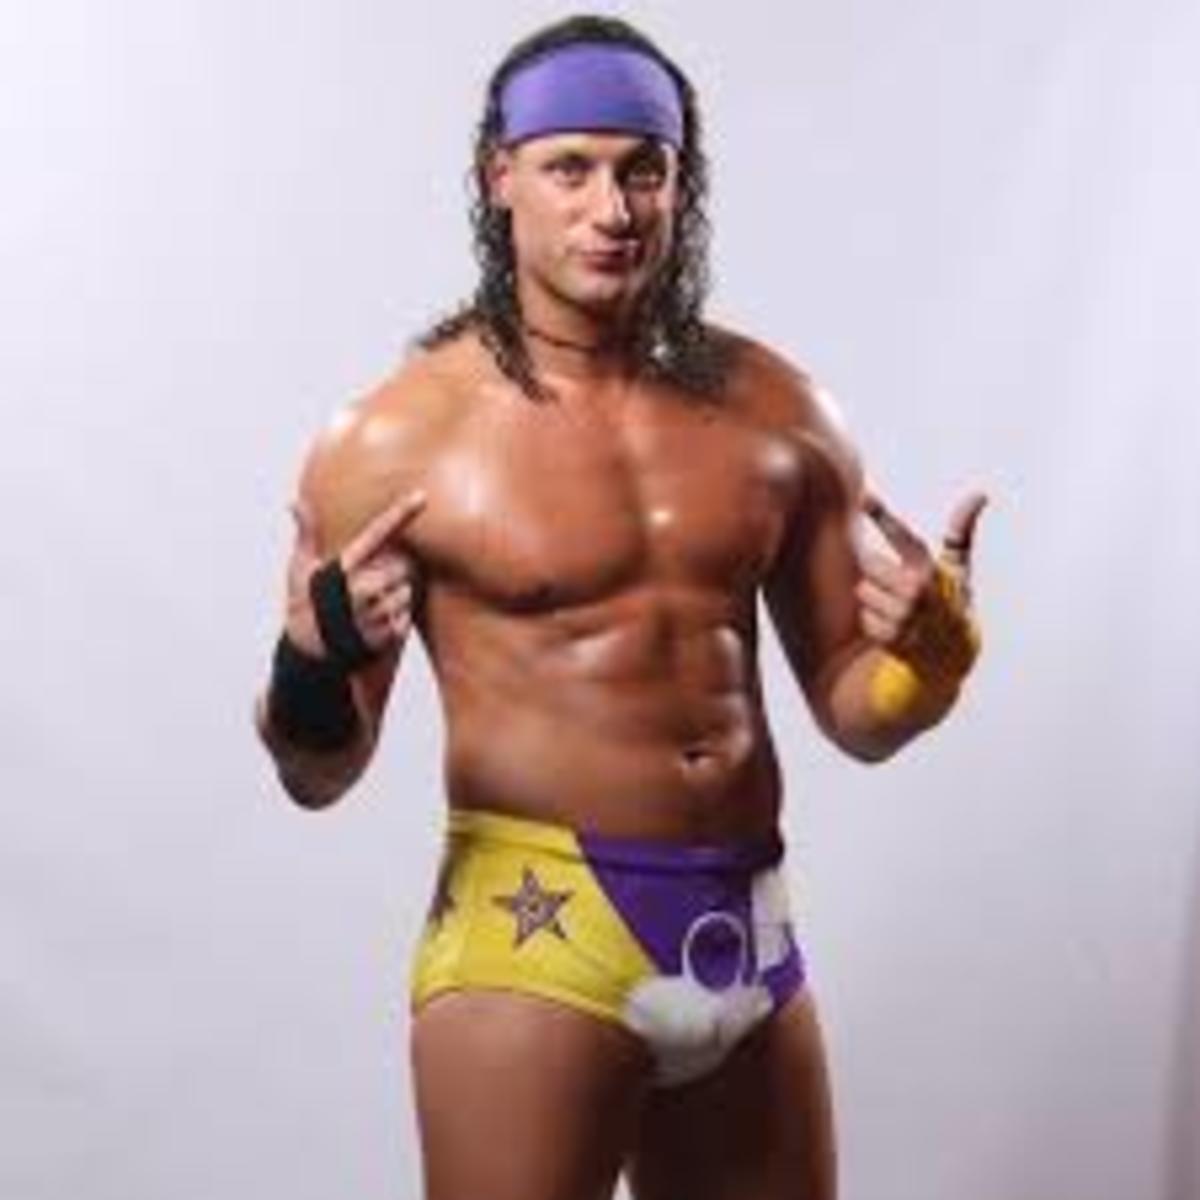 Matt Taven's knee injury is real; fighters miss weight